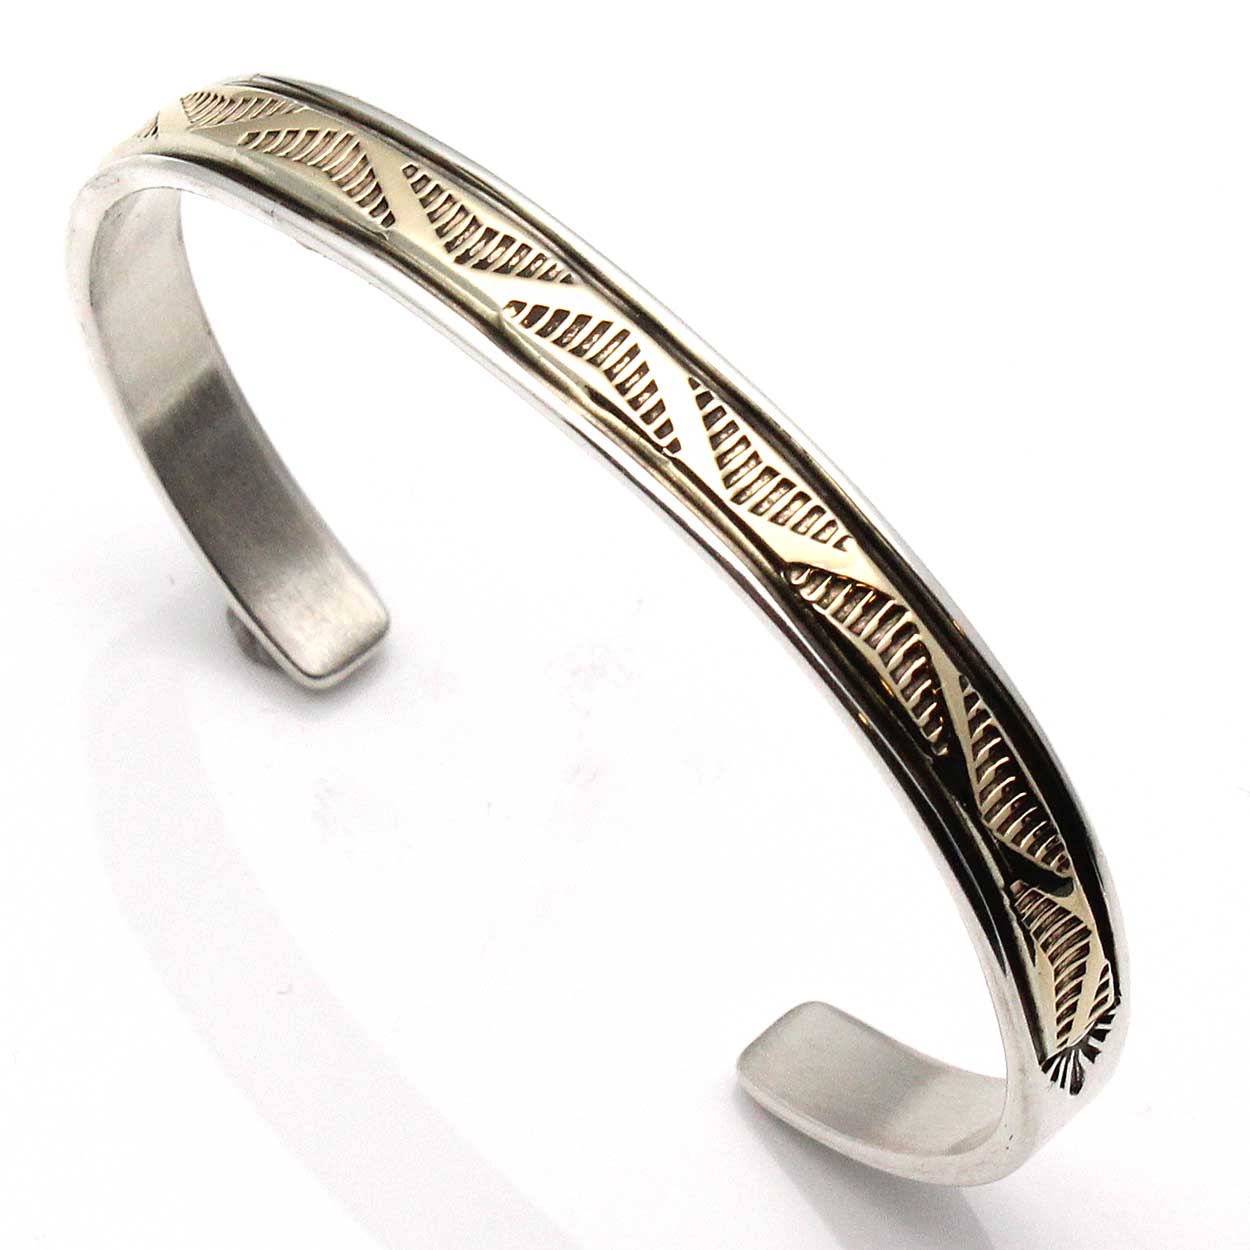 Sterling Silver and 14KT Gold Bracelet by Morgan